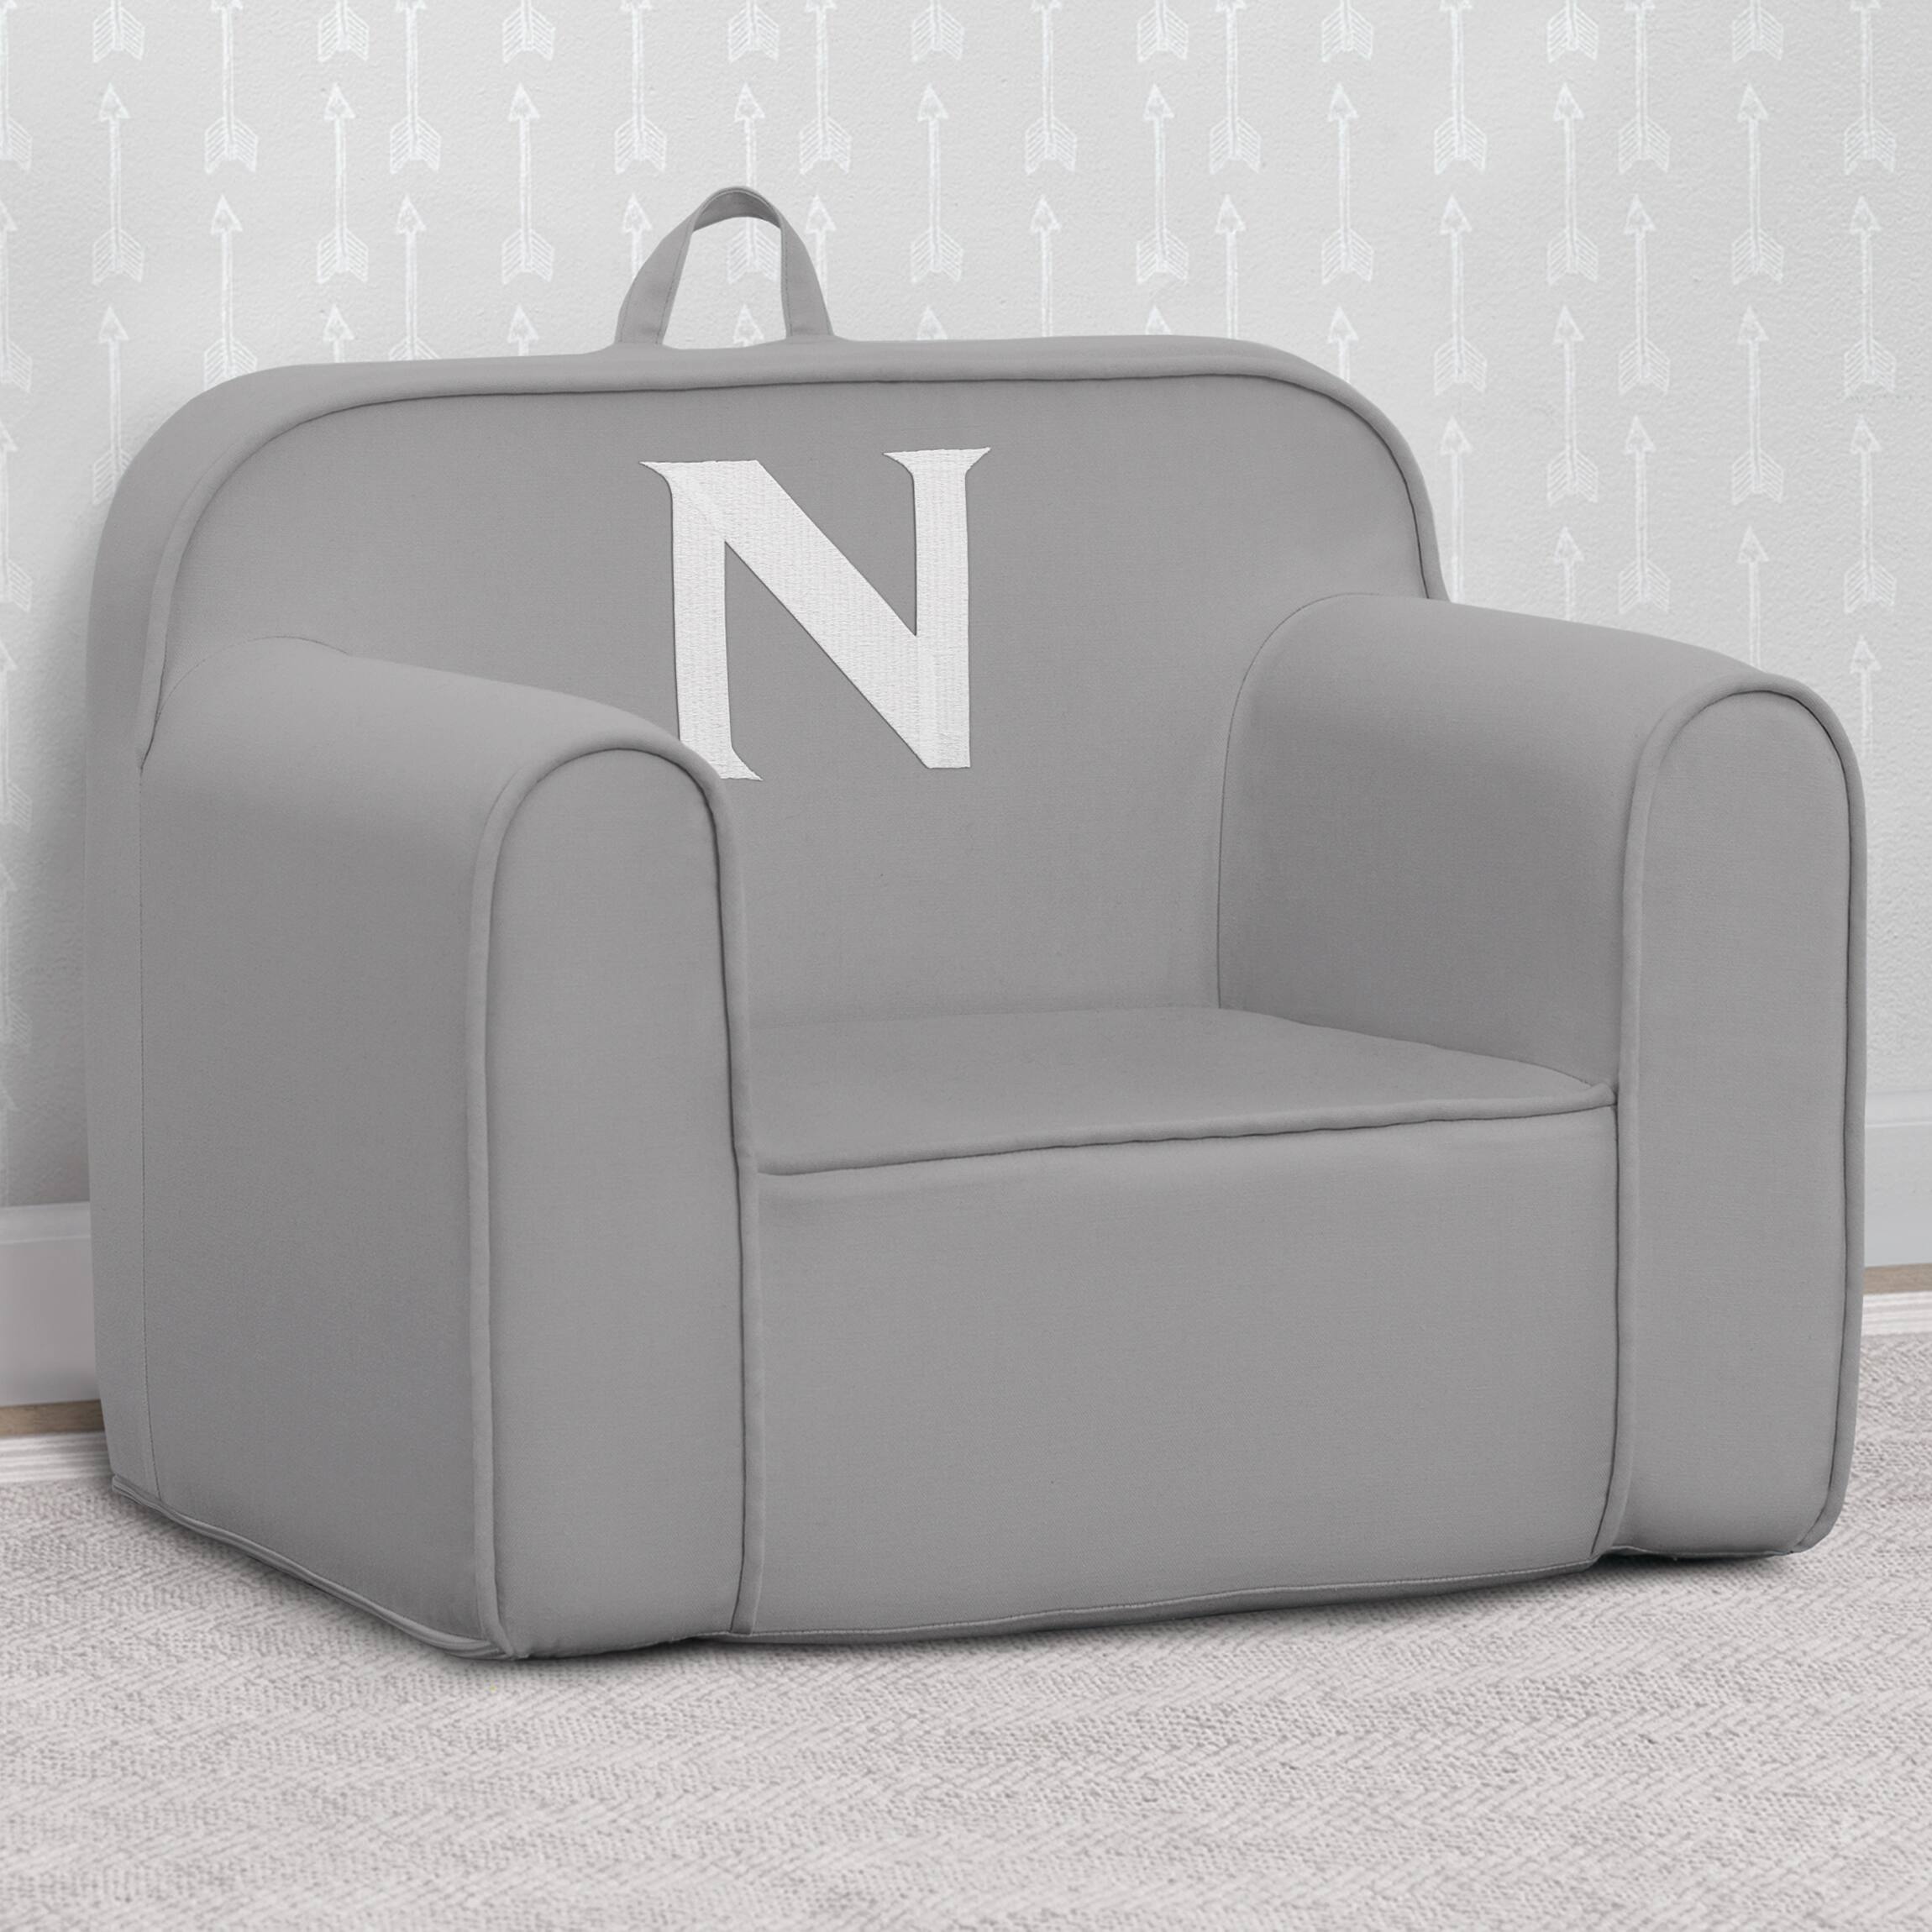 Delta Children Personalized Monogram Cozee Chair - Customize with Letter N